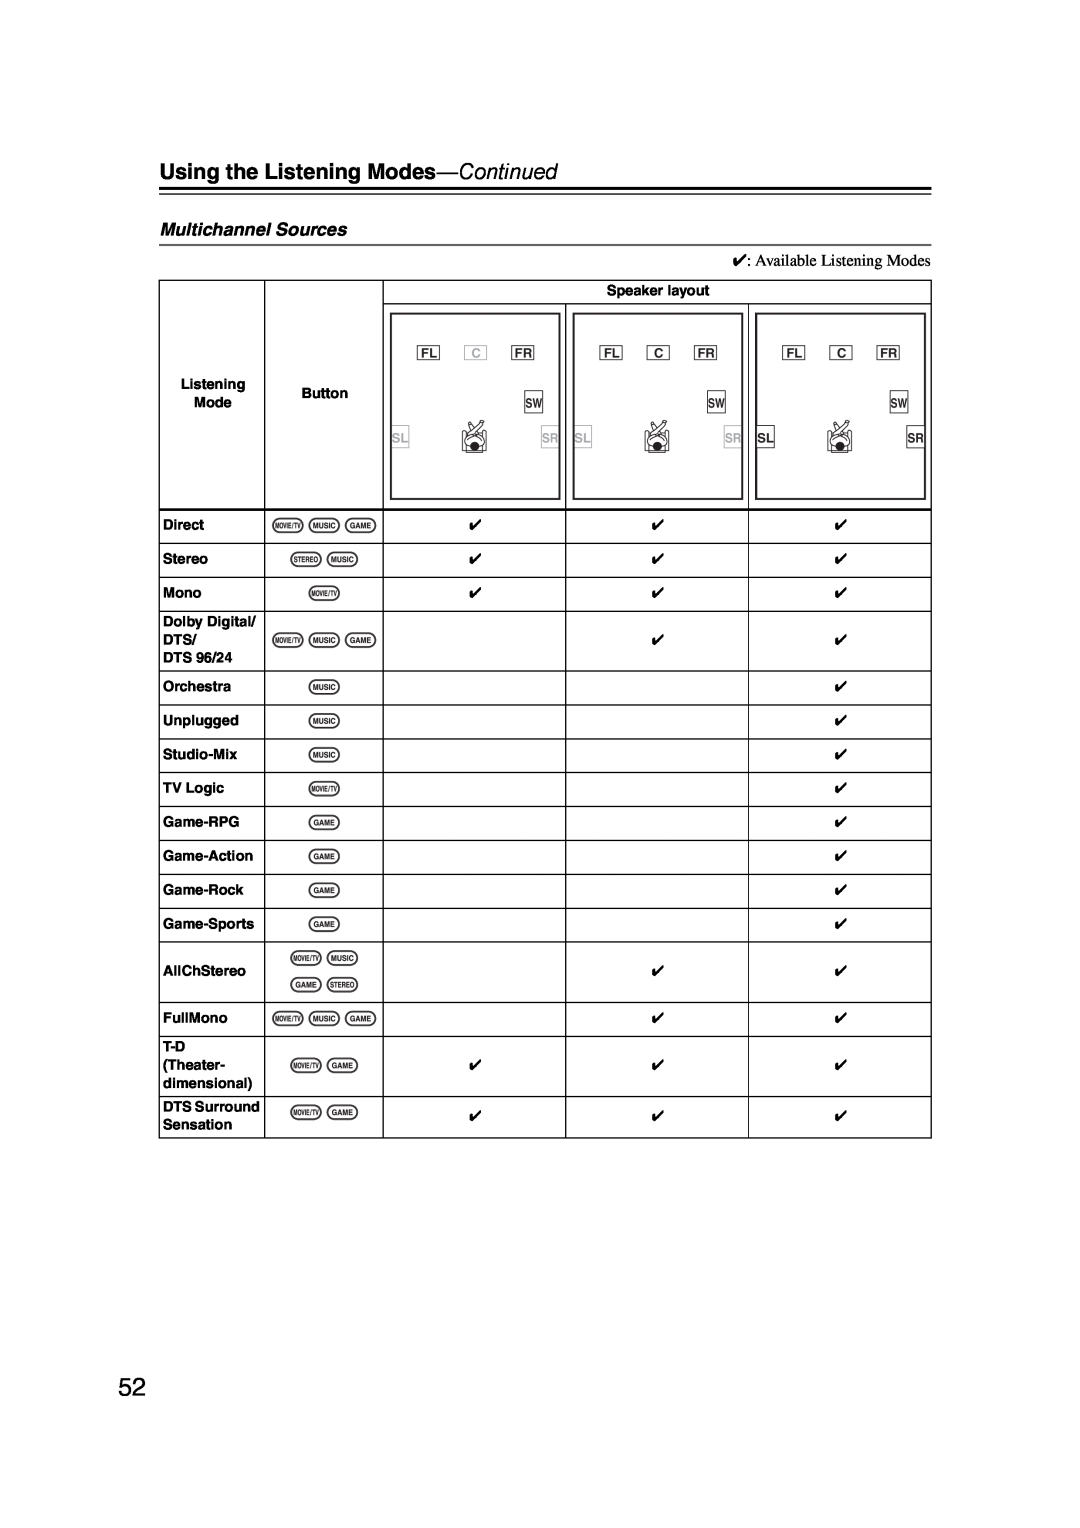 Onkyo TXSR307 instruction manual Multichannel Sources, Using the Listening Modes-Continued 